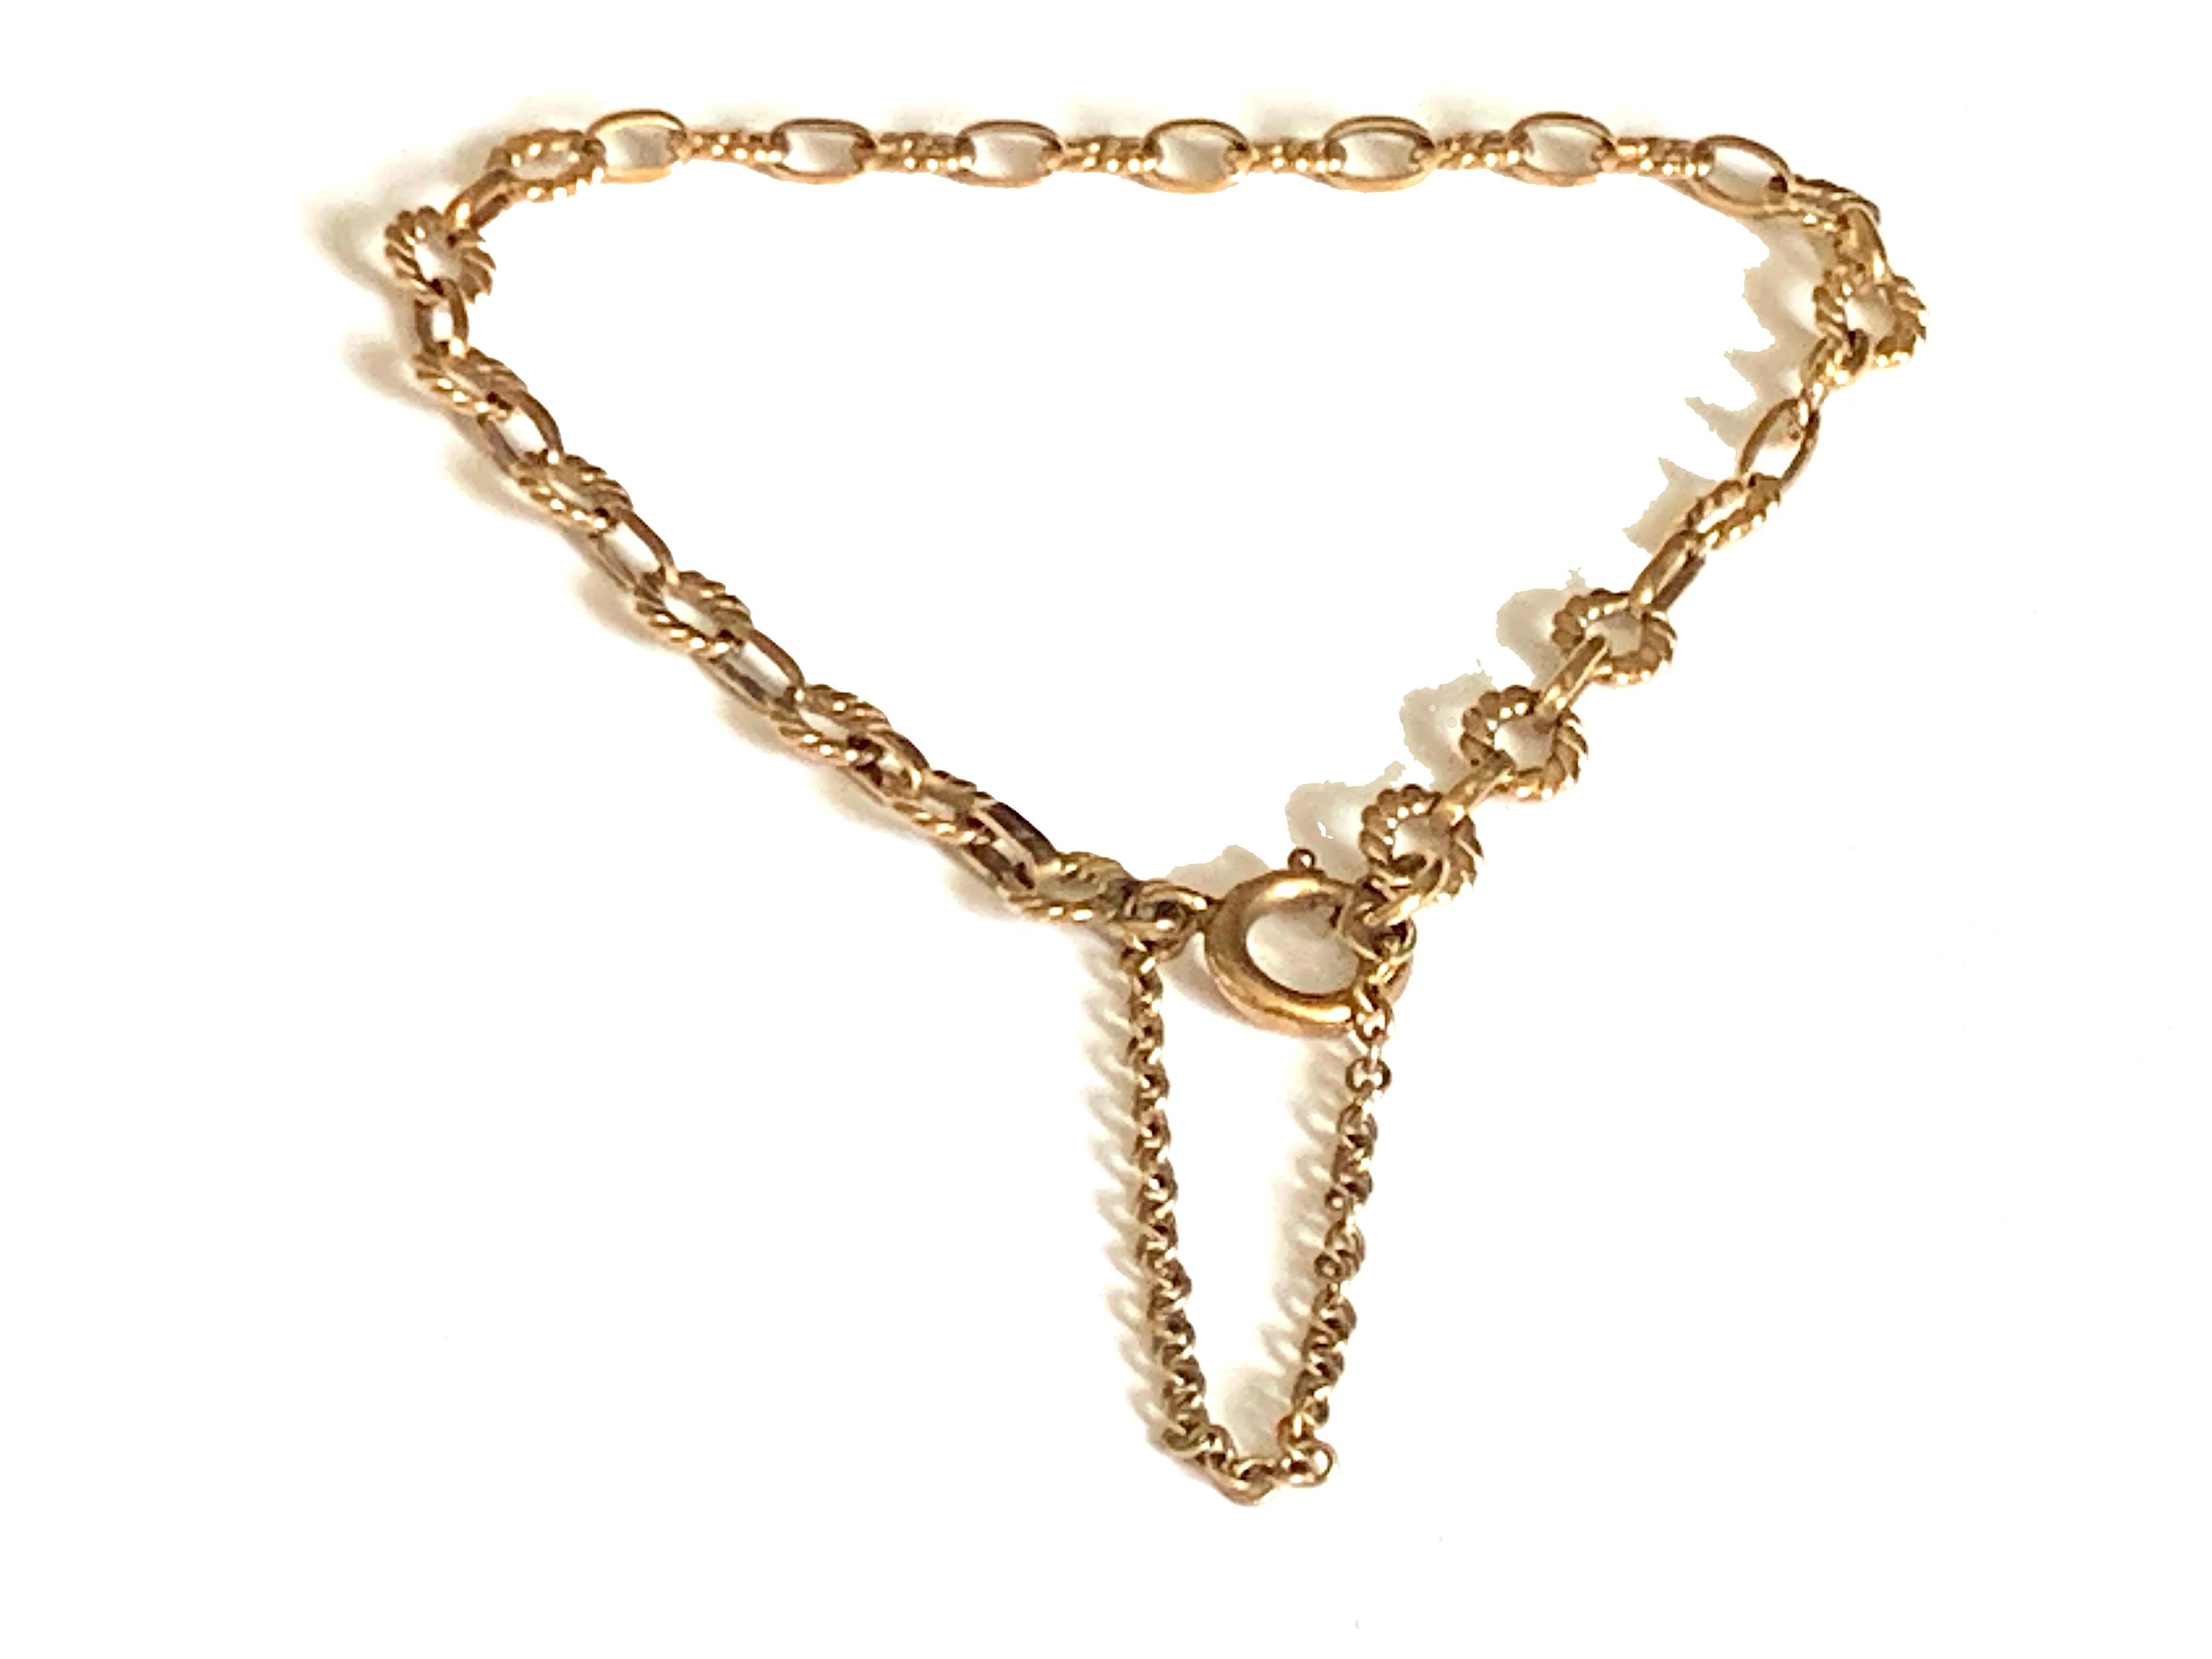 Vintage 
9ct Gold Bracelet with Safety Chain 

Circa 1960s
Hallmarks present 
Length 7 Inches 
Max. Wrist Fit 6.75